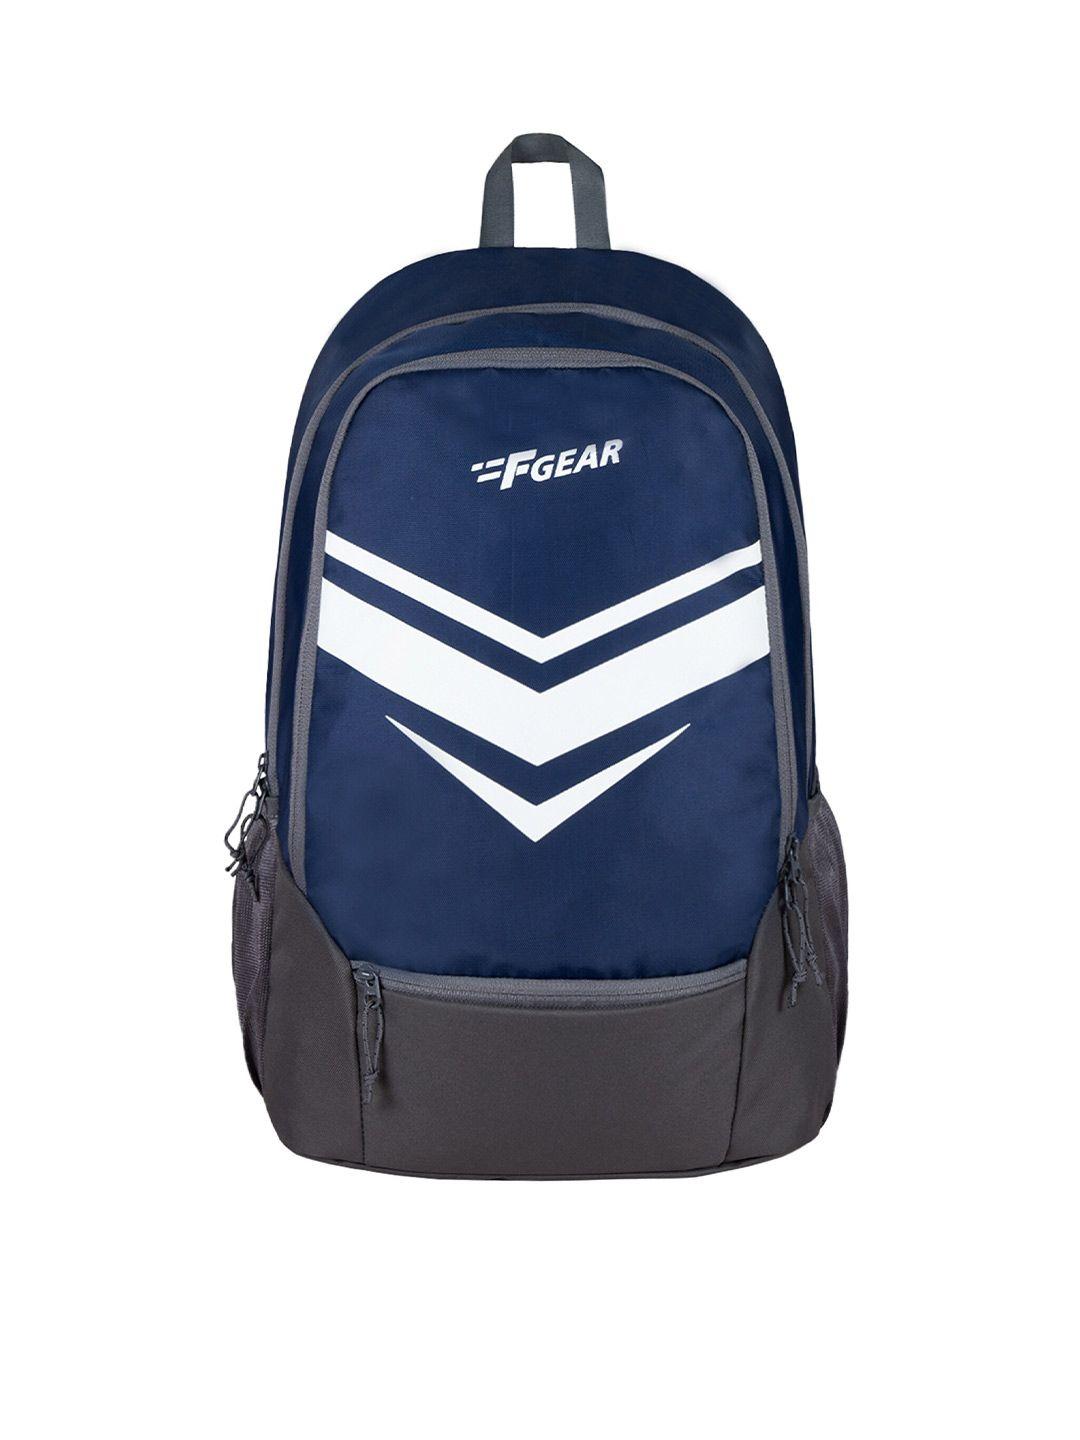 f gear unisex striped contrast detail backpack